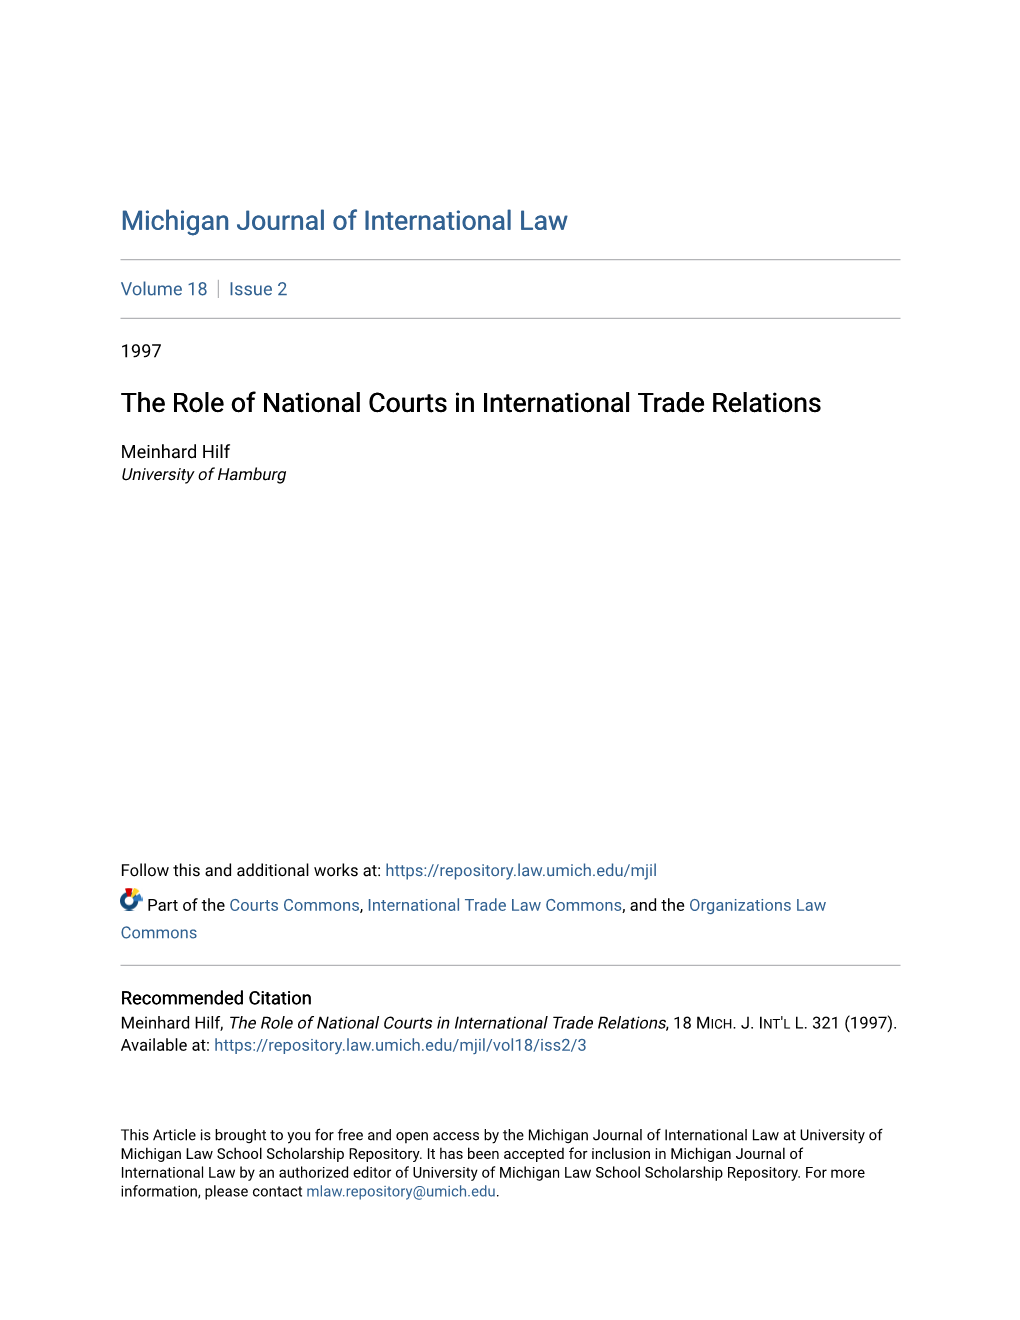 The Role of National Courts in International Trade Relations